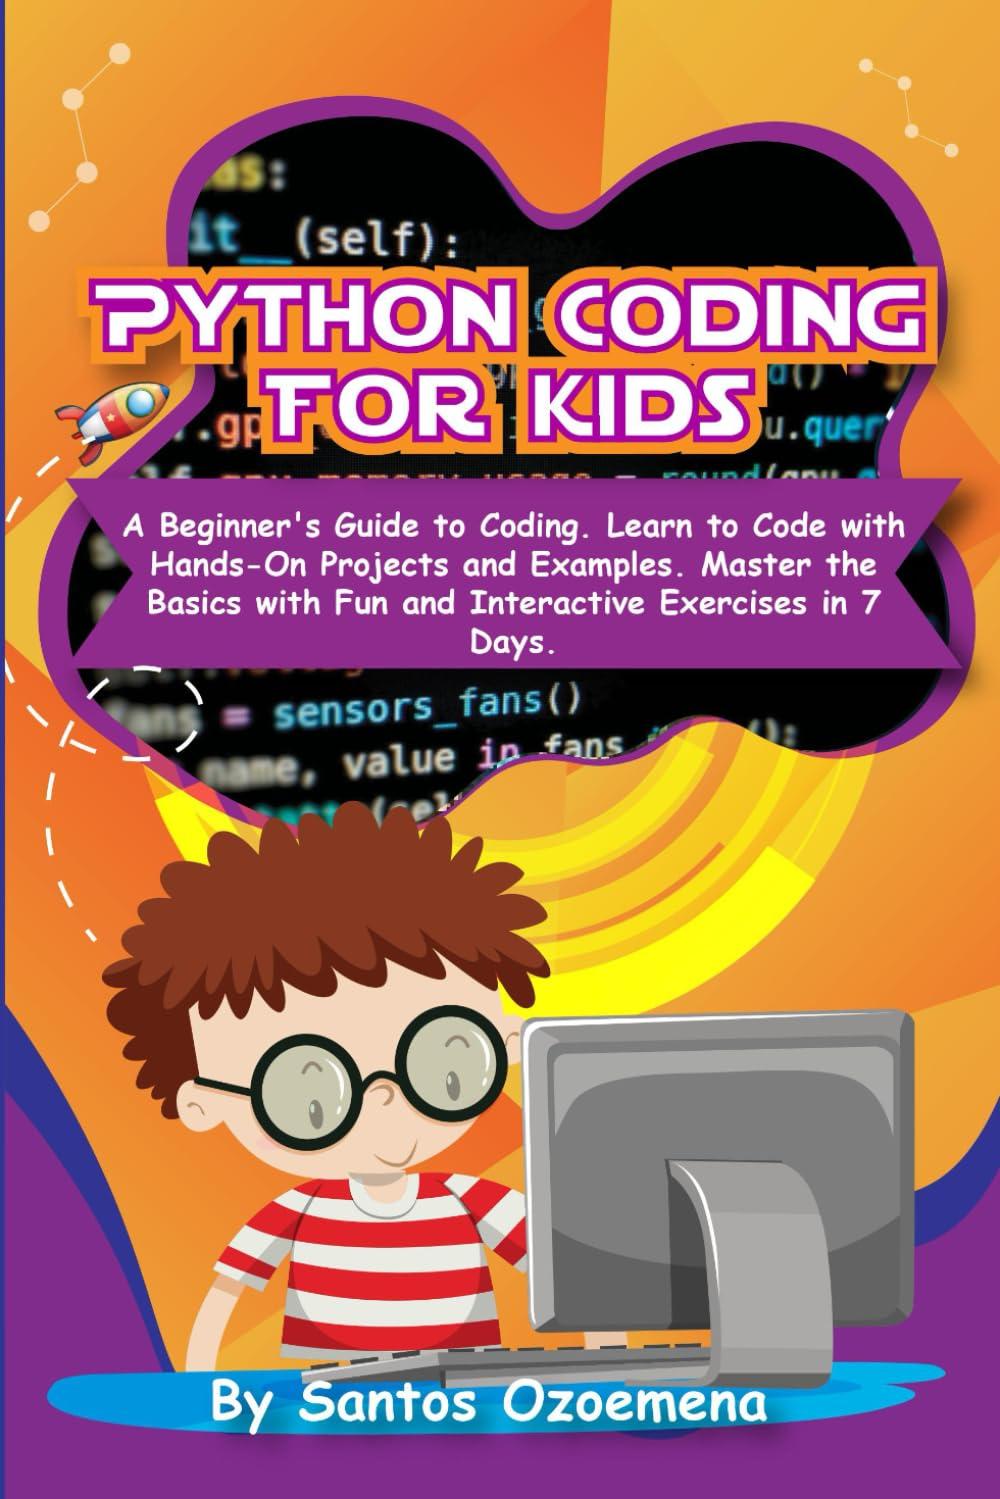 python coding for kids a beginner’s guide to coding learn to code with hands on projects and examples